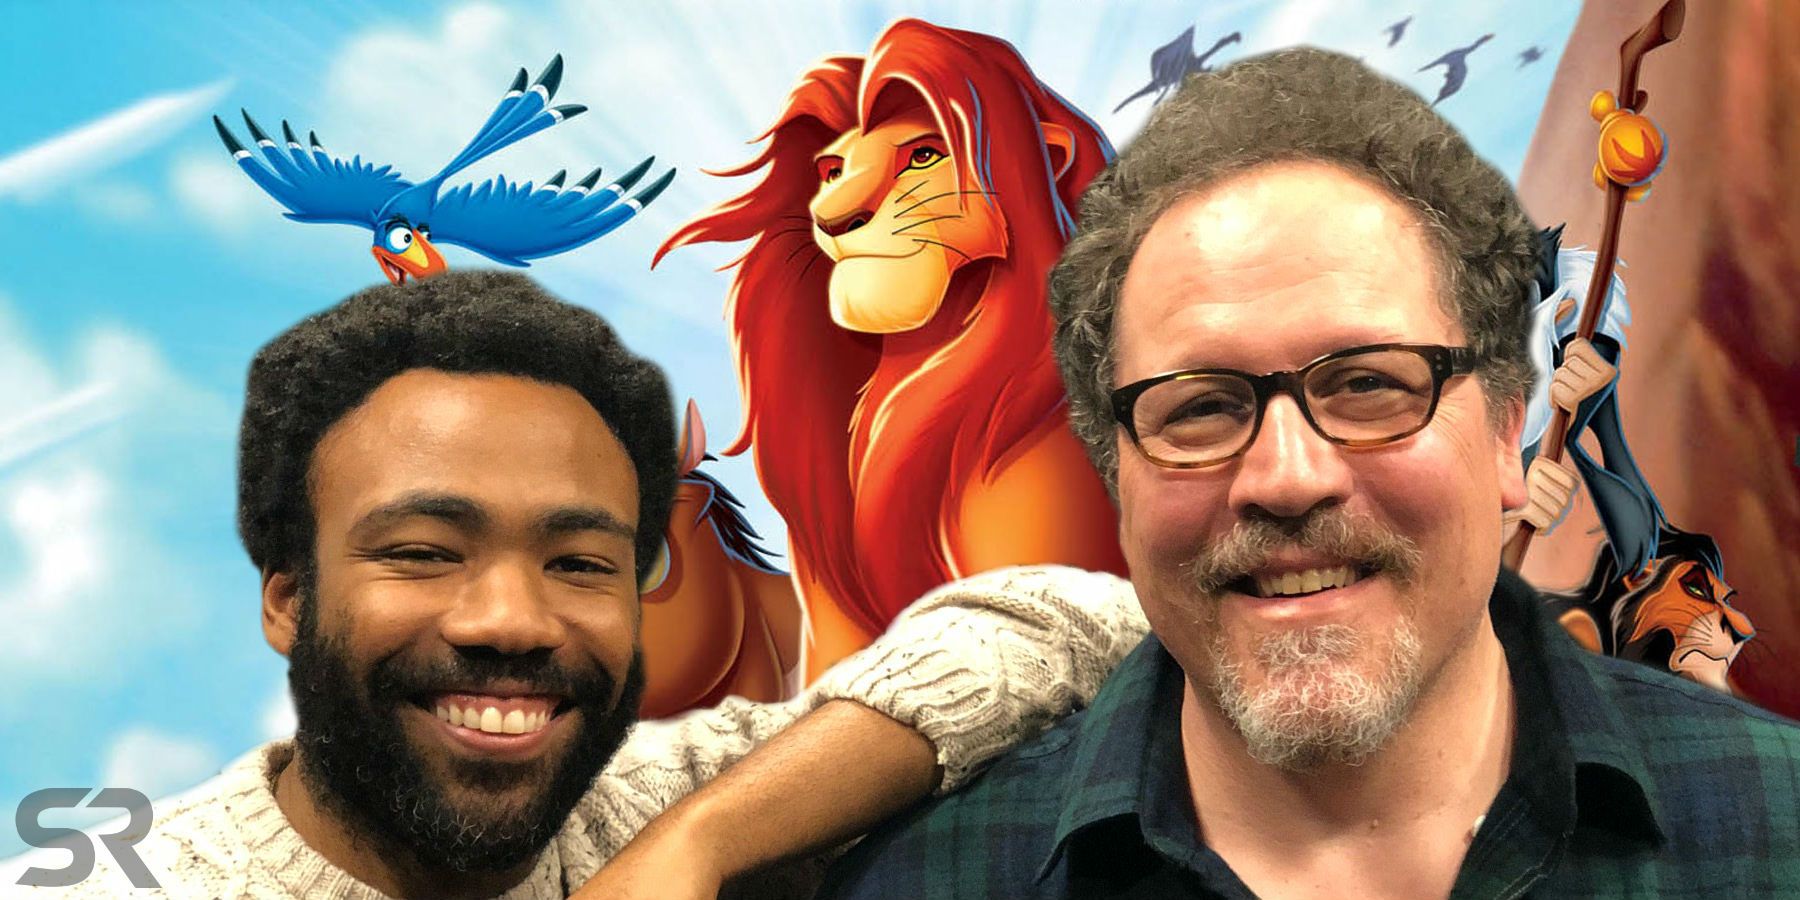 The Lion King Live-Action Trailer Releases TODAY